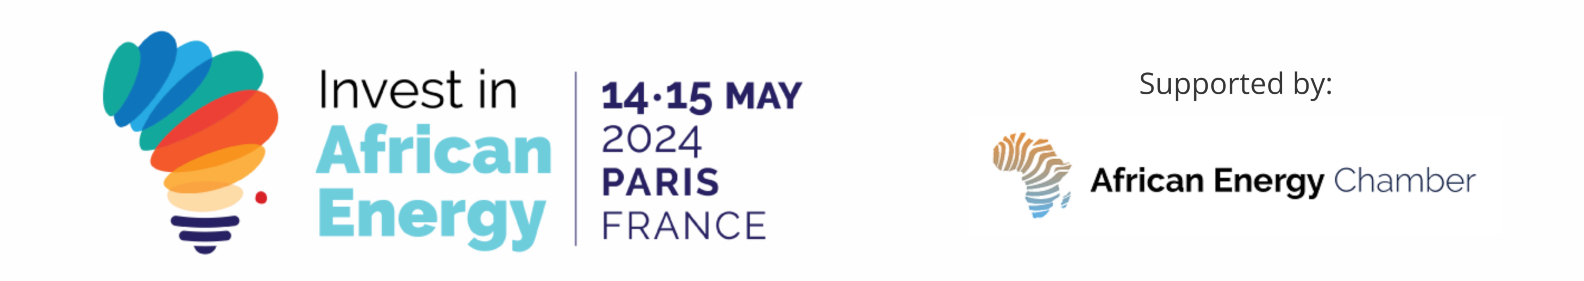 INVITATION TO THE INVEST IN AFRICAN ENERGY FORUM IN PARIS, FRANCE, MAY 14-15 2024